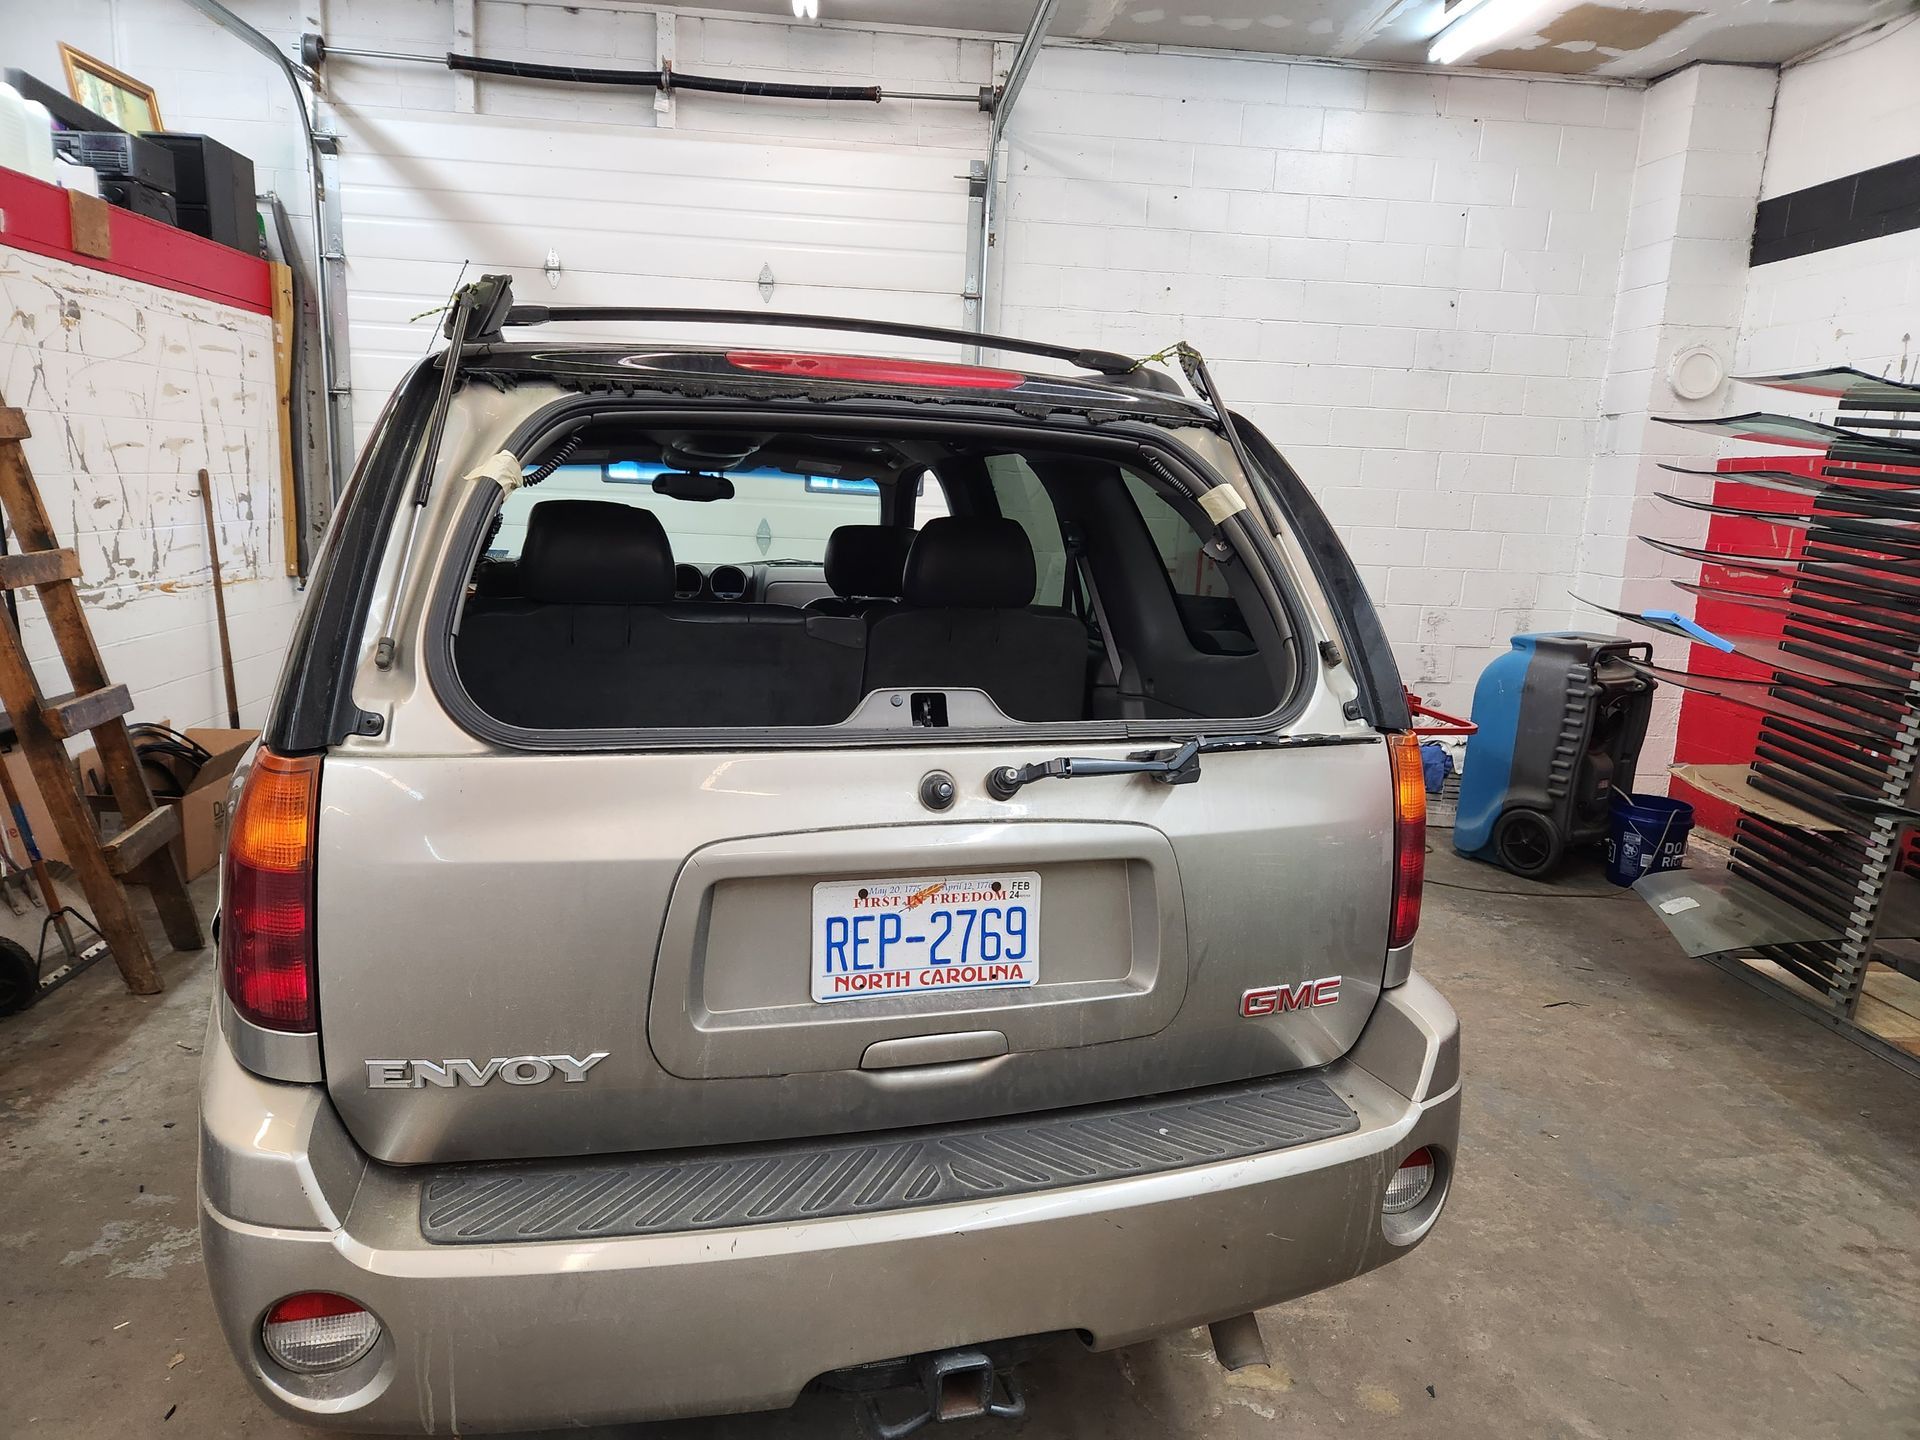 Rear Glass Replaced on an SUV in Boone, NC